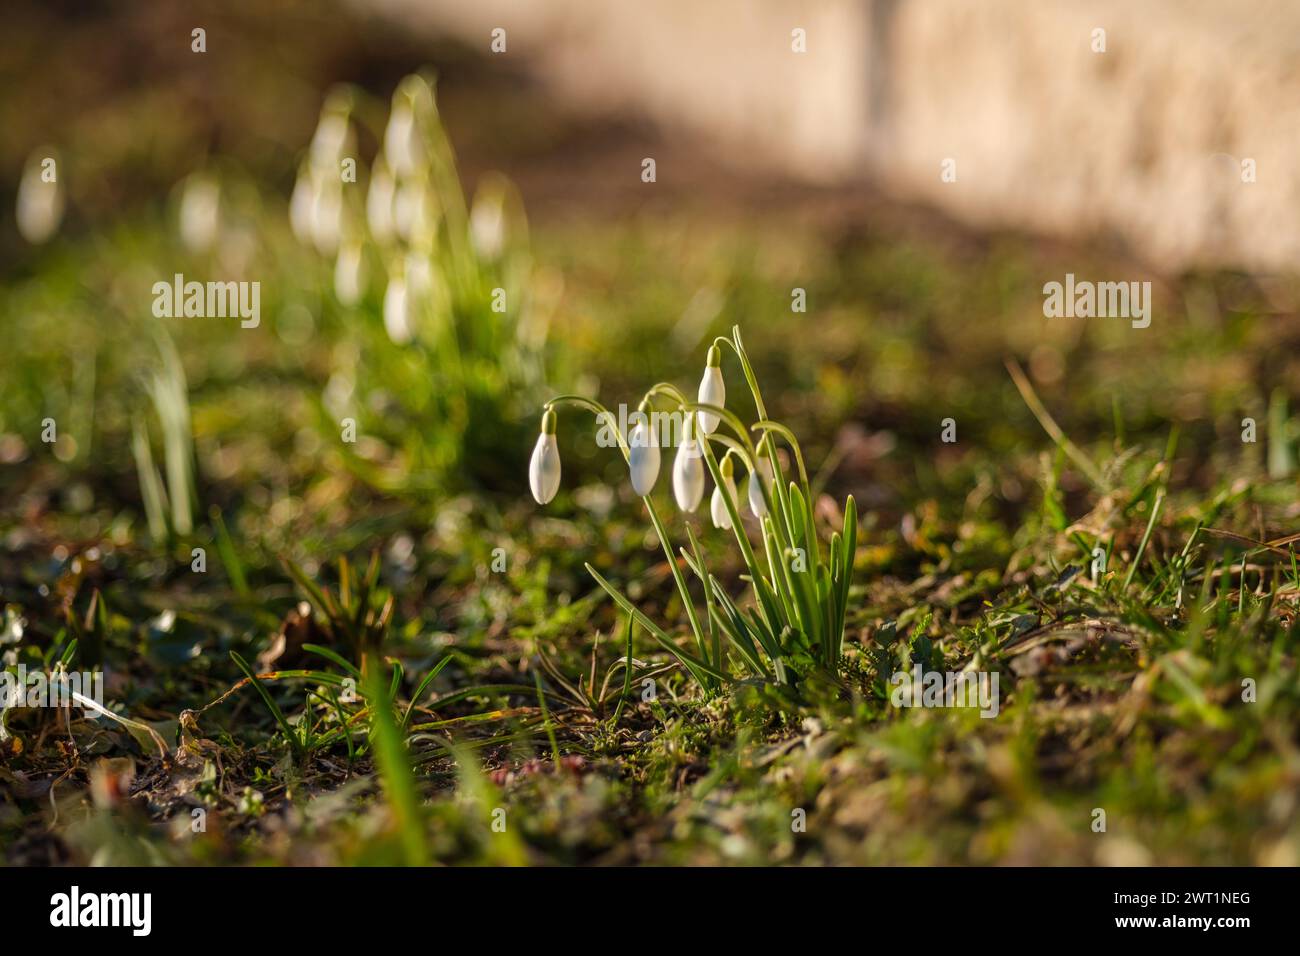 Snowdrops emerge from Latvia's frosty ground, a promise of brighter days ahead Stock Photo